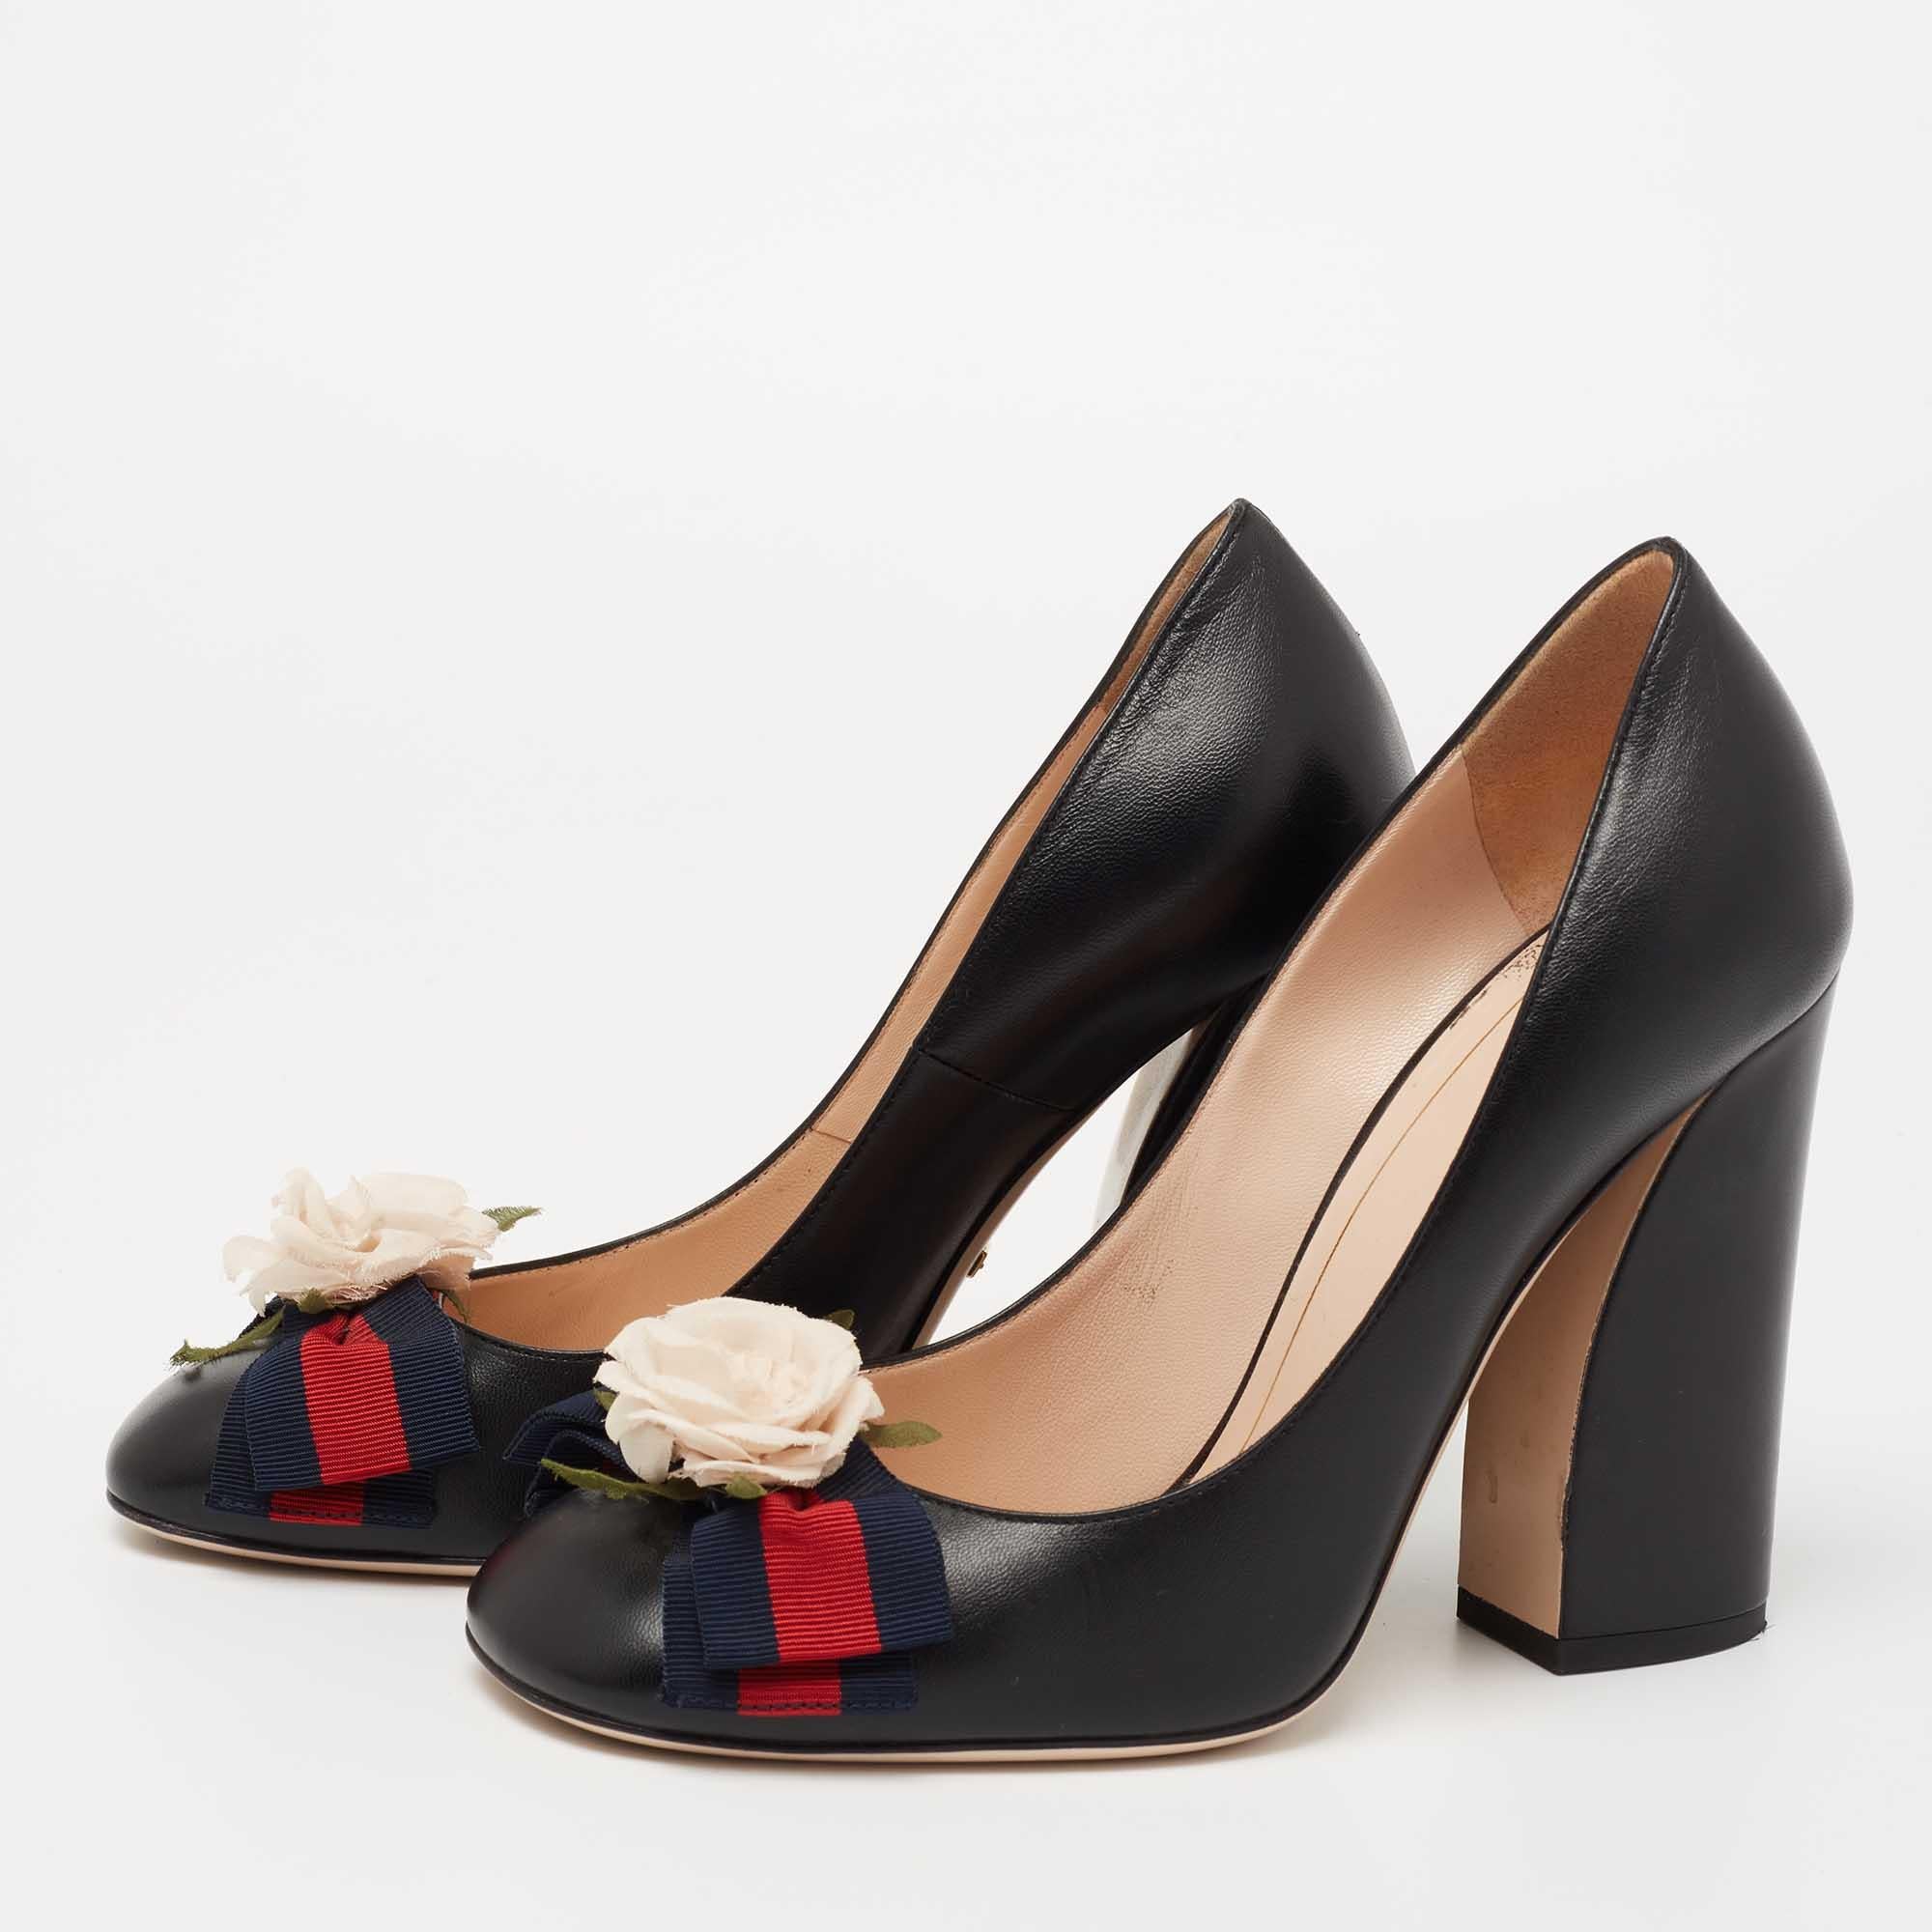 The black exterior of this pair of Gucci pumps is decorated with a floral motif on the Web bow. Constructed from leather, it is defined by round toes, gold-tone hardware, and block heels.

Includes: Original Dustbag